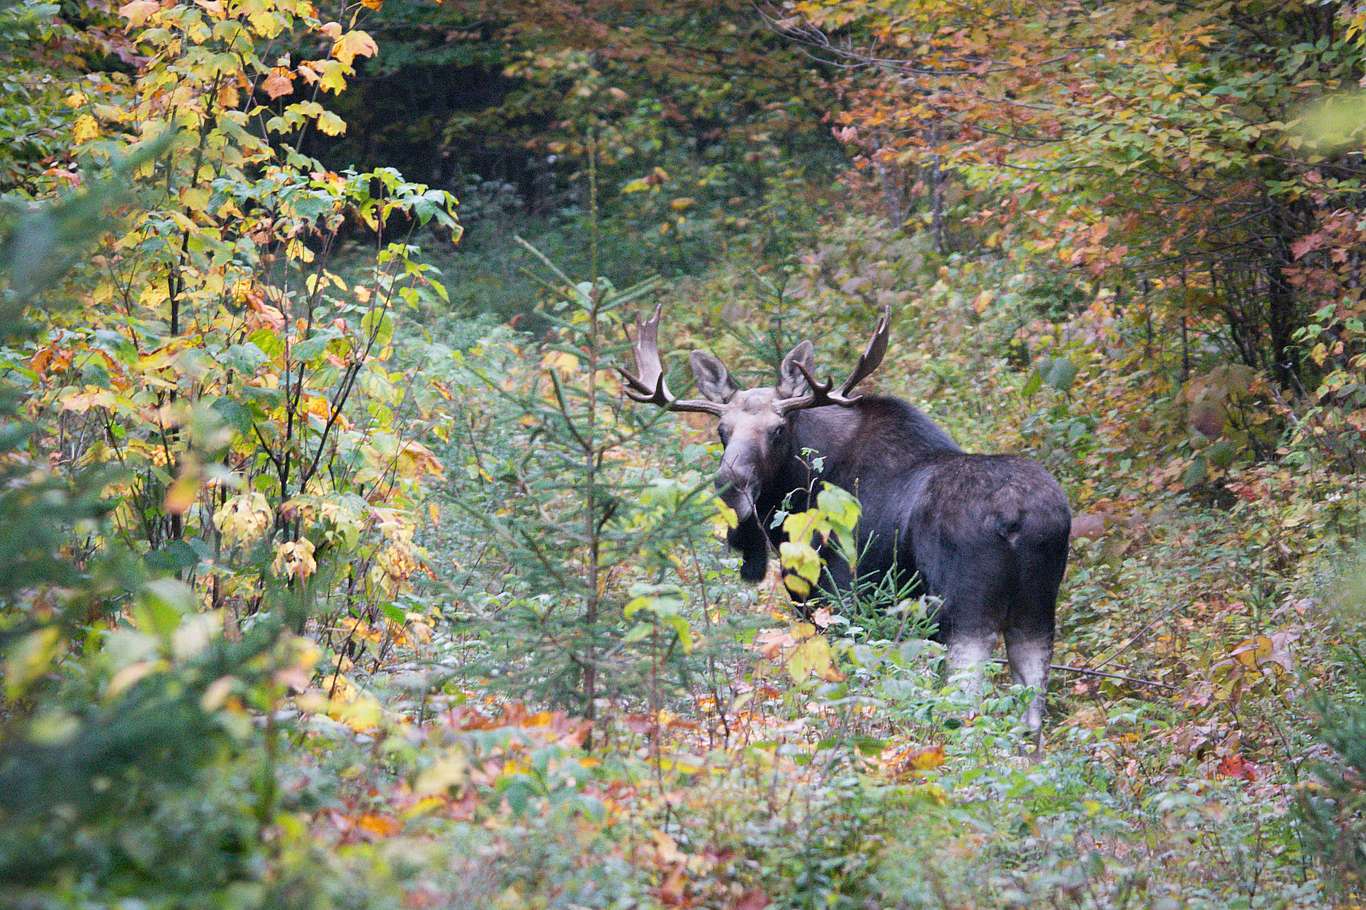 A photo of a moose looking at the viewer in dense underbrush.